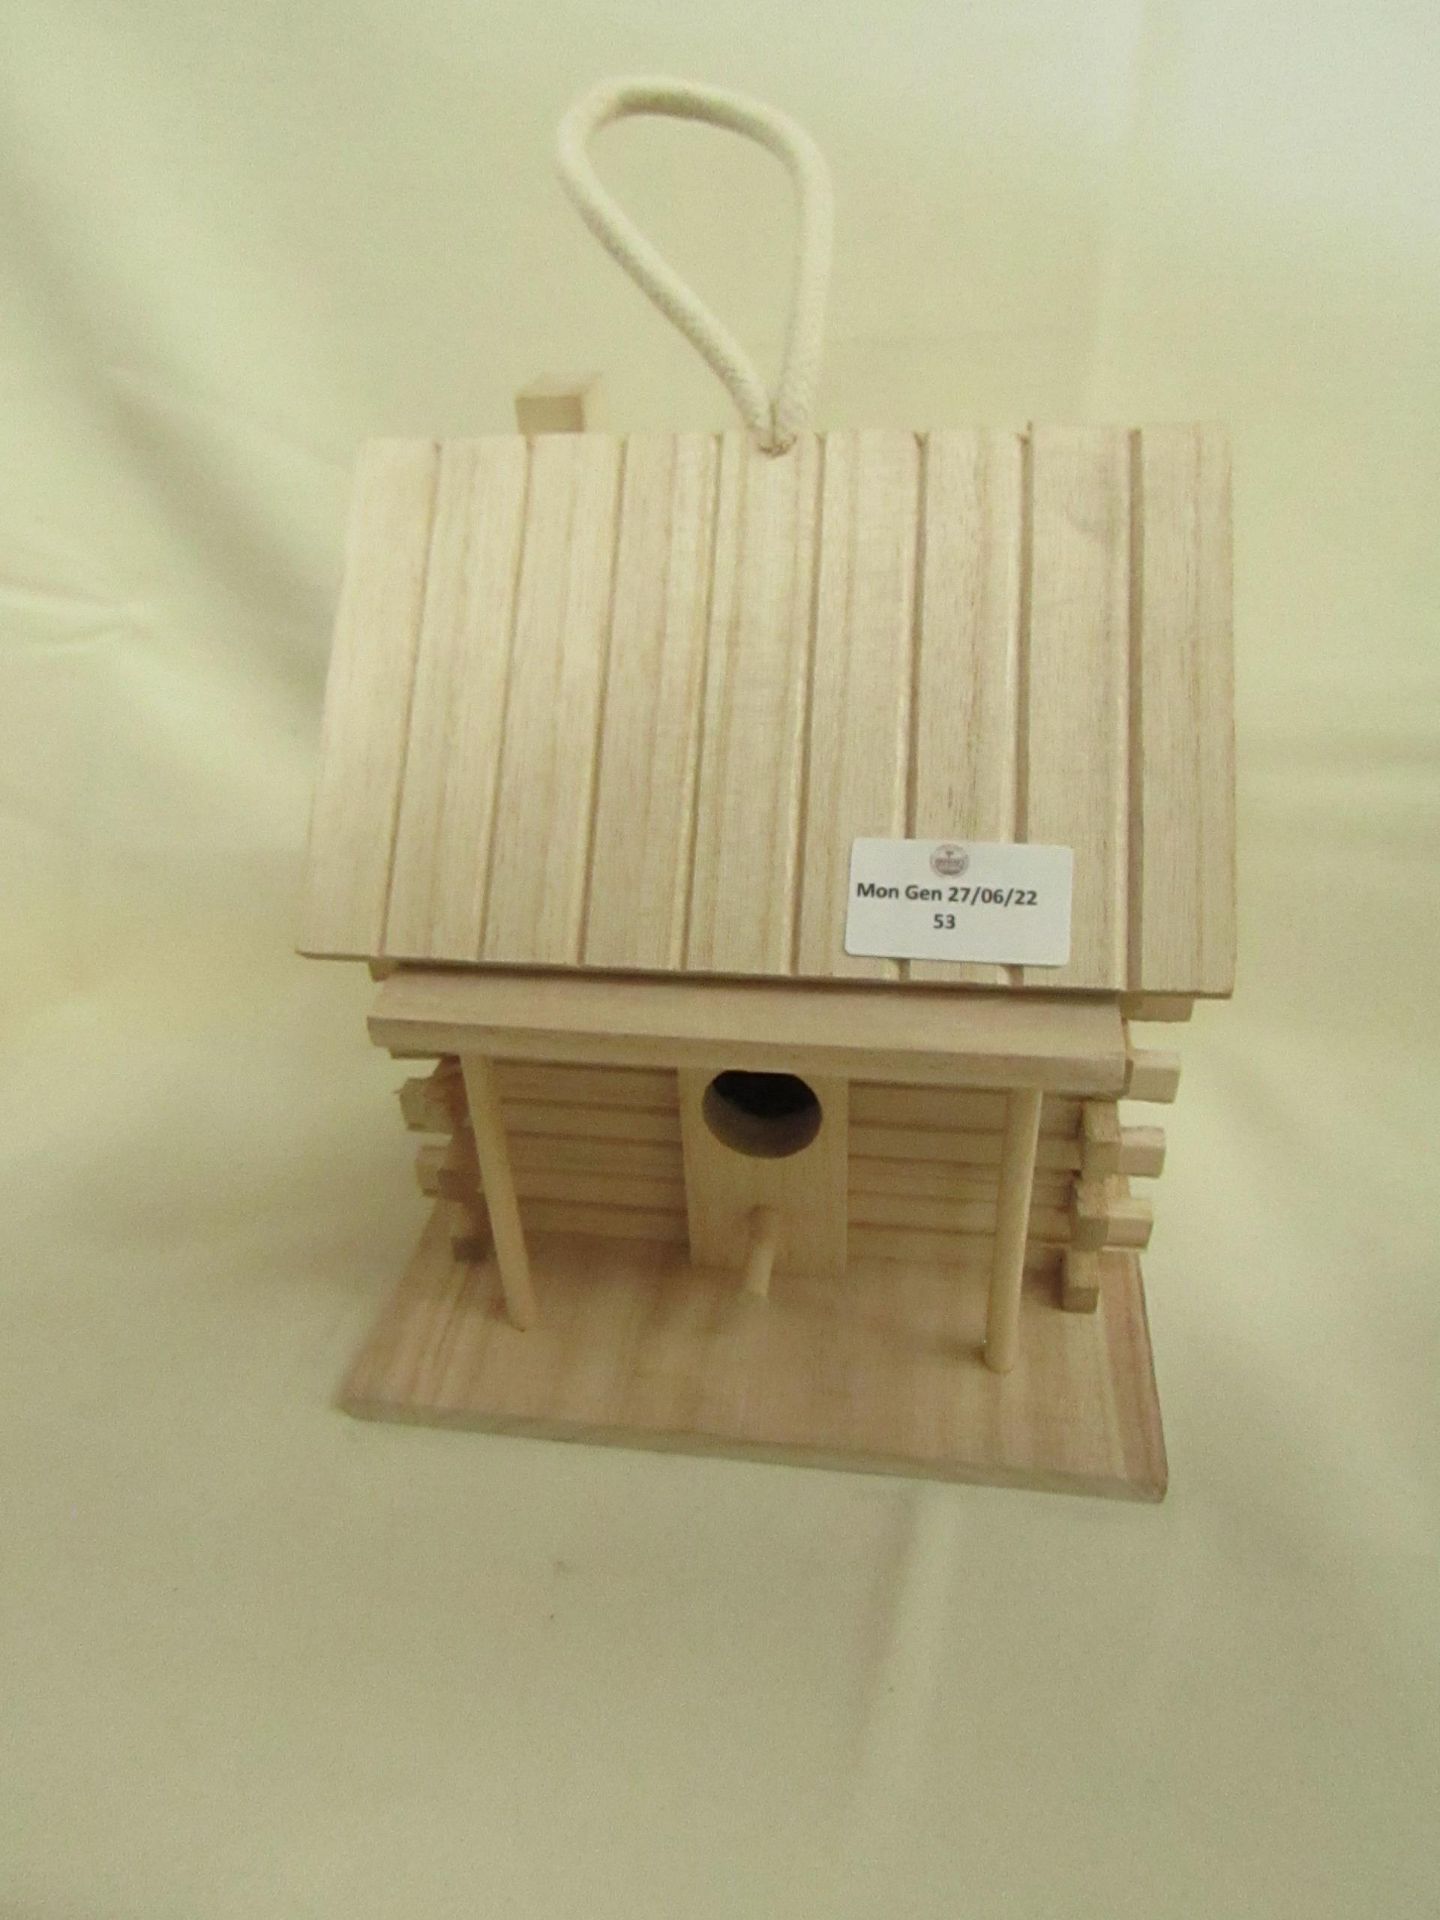 Unbranded - Wooden Hanging Bird House Feeder - Good Condition, No Packaging.